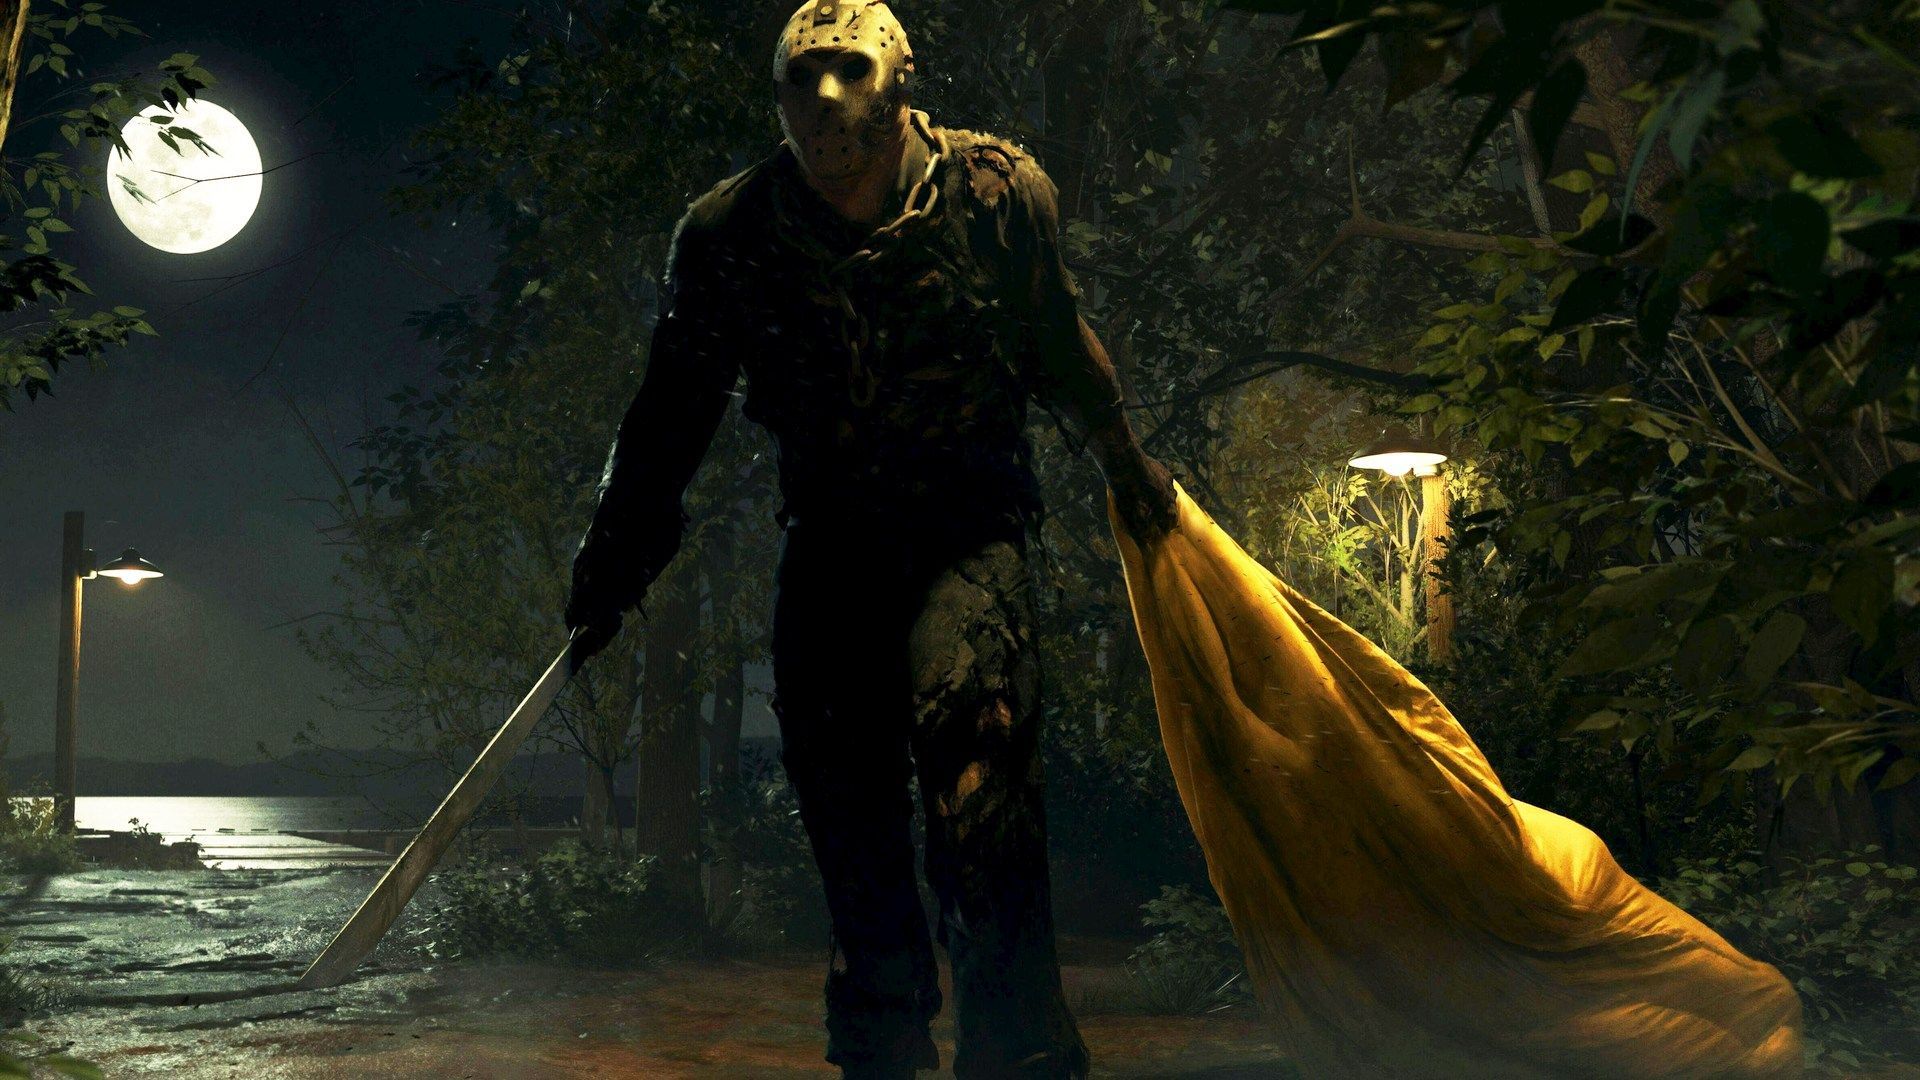 Friday the 13th Wallpaper Free Friday the 13th Background